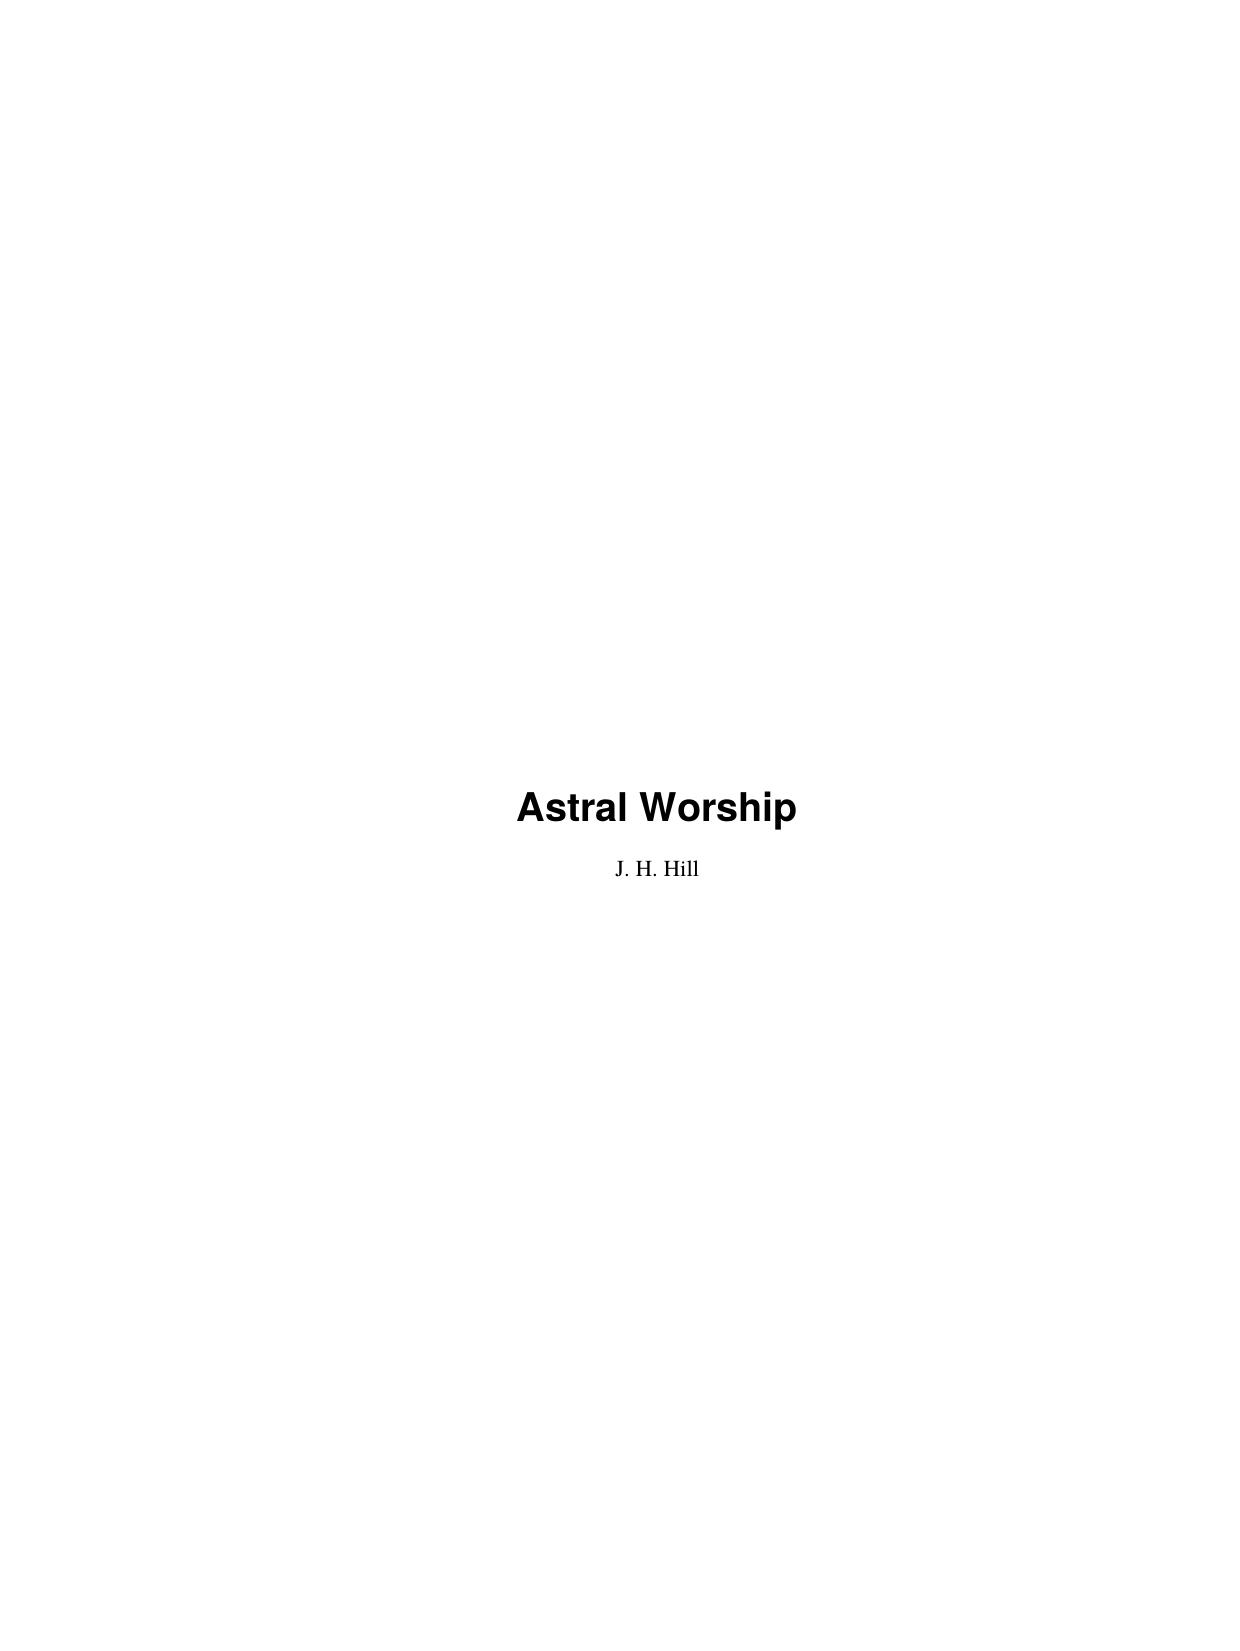 Astral Worship by J. H. Hill